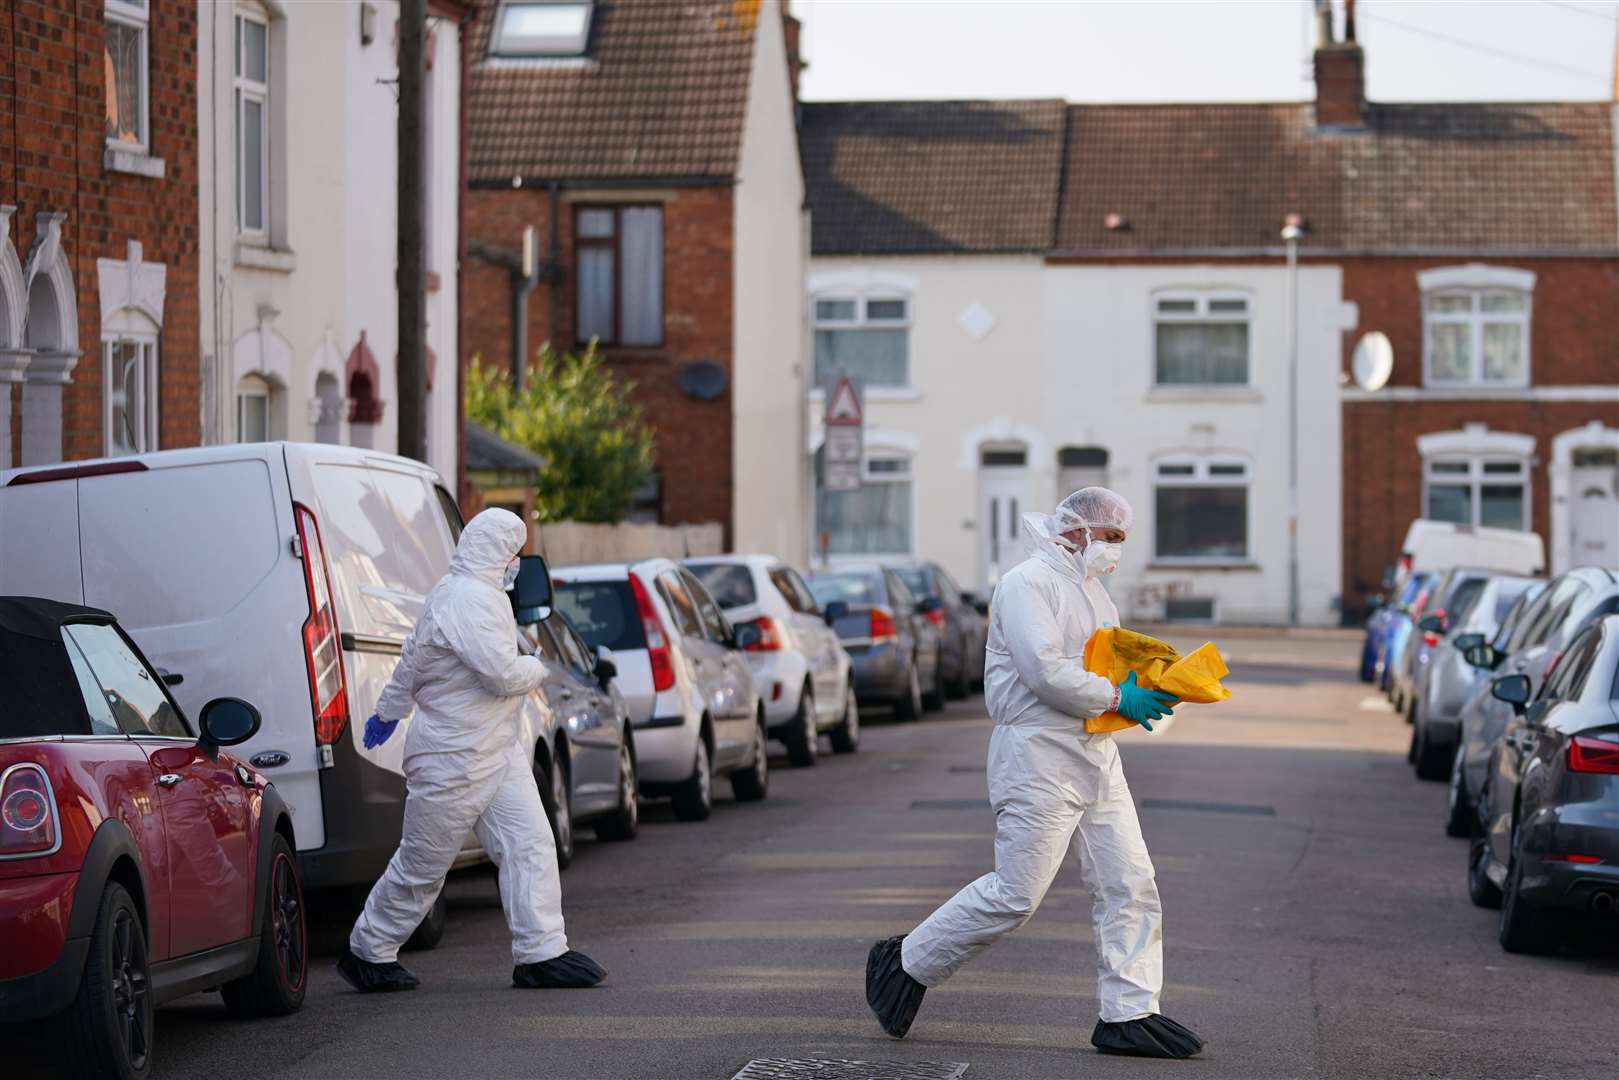 Forensic officers at the scene in Moore Street, Kingsley, Northampton following the discovery of human remains in a rear garden (Jacob King/PA)